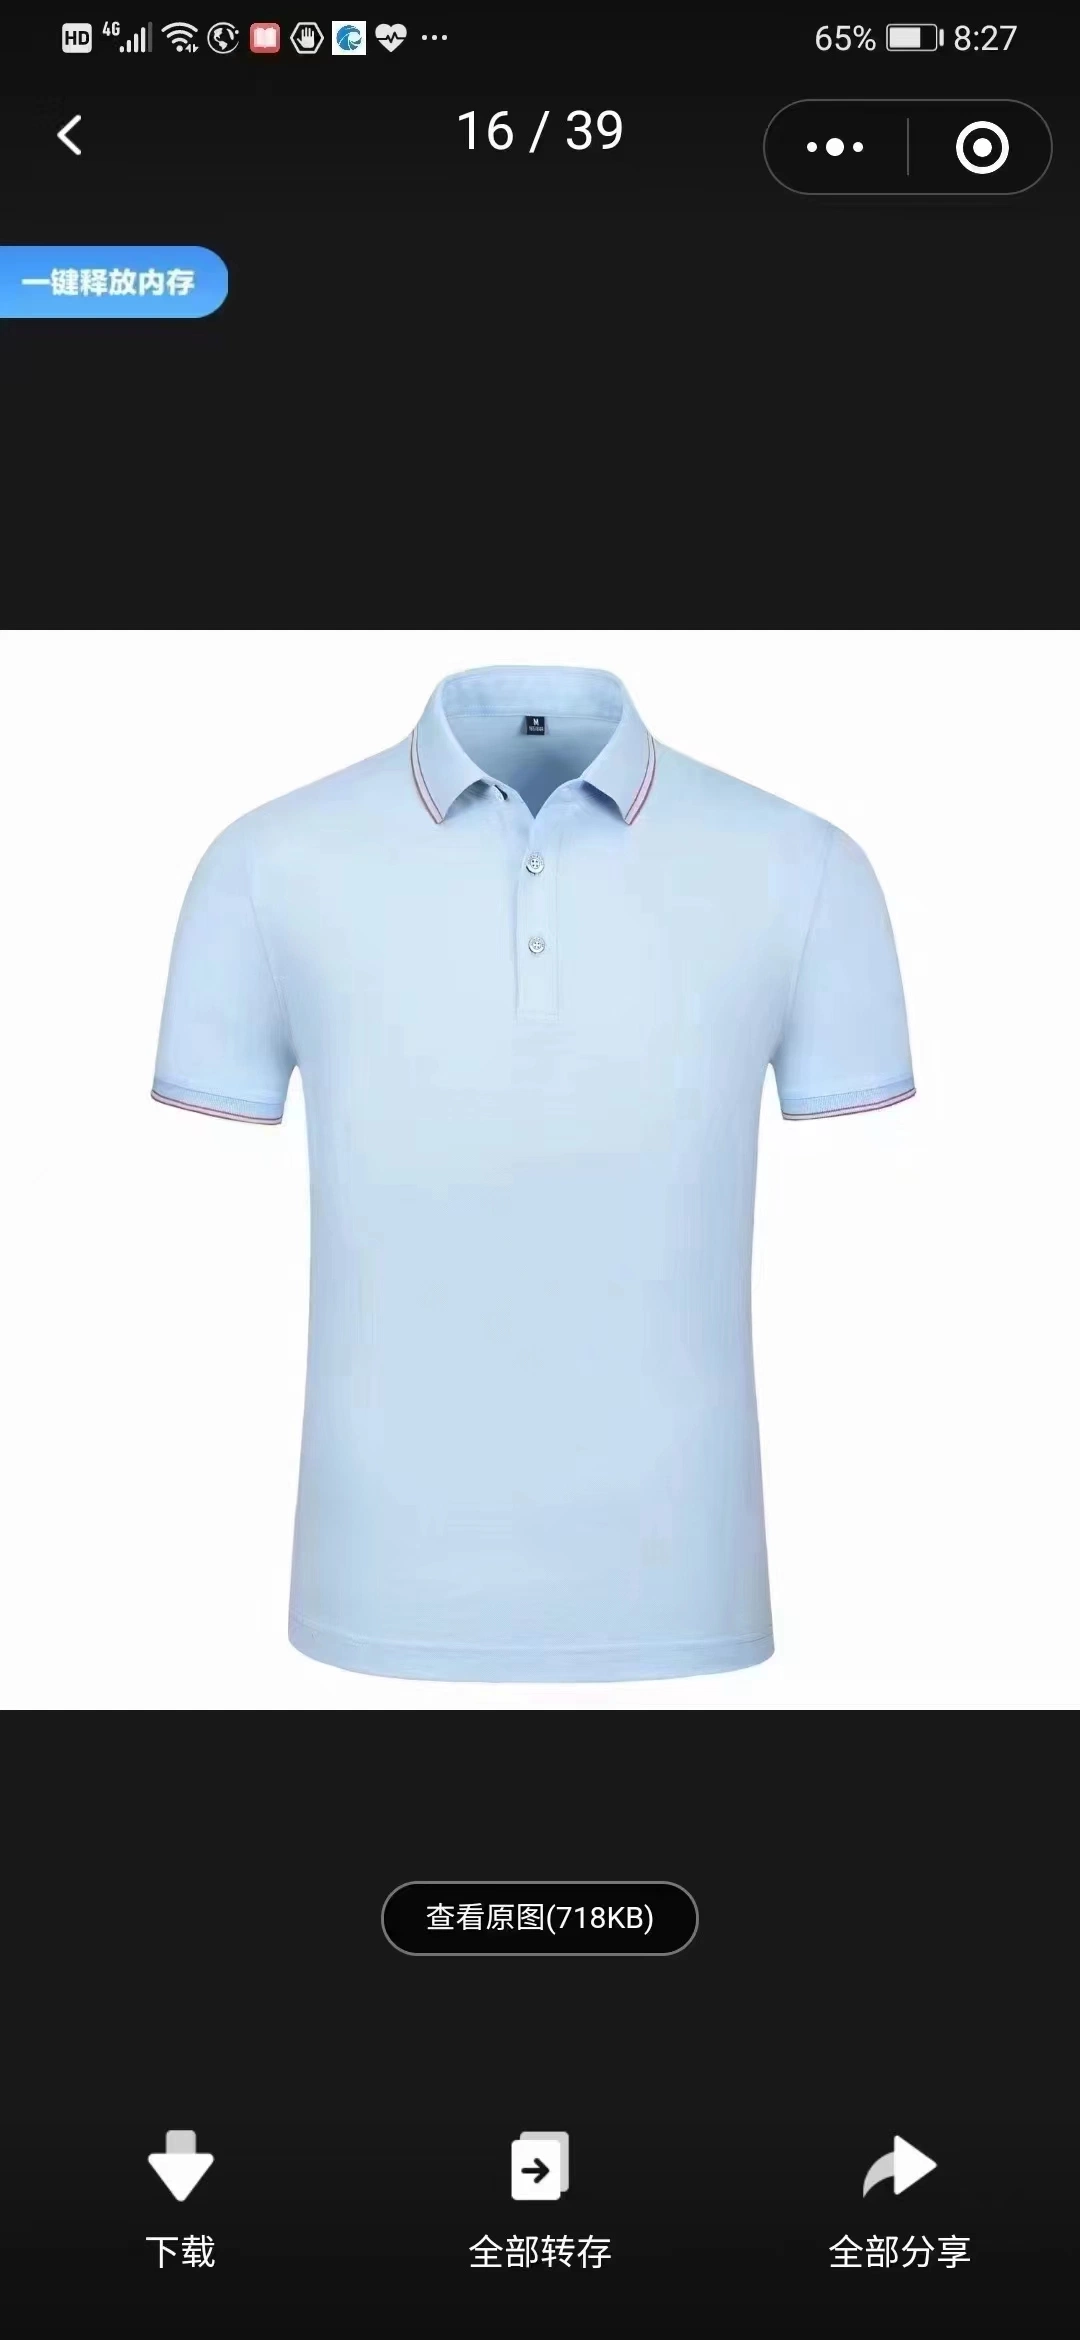 Eight Color for Men's Polo Shirt Very Cheaper Price